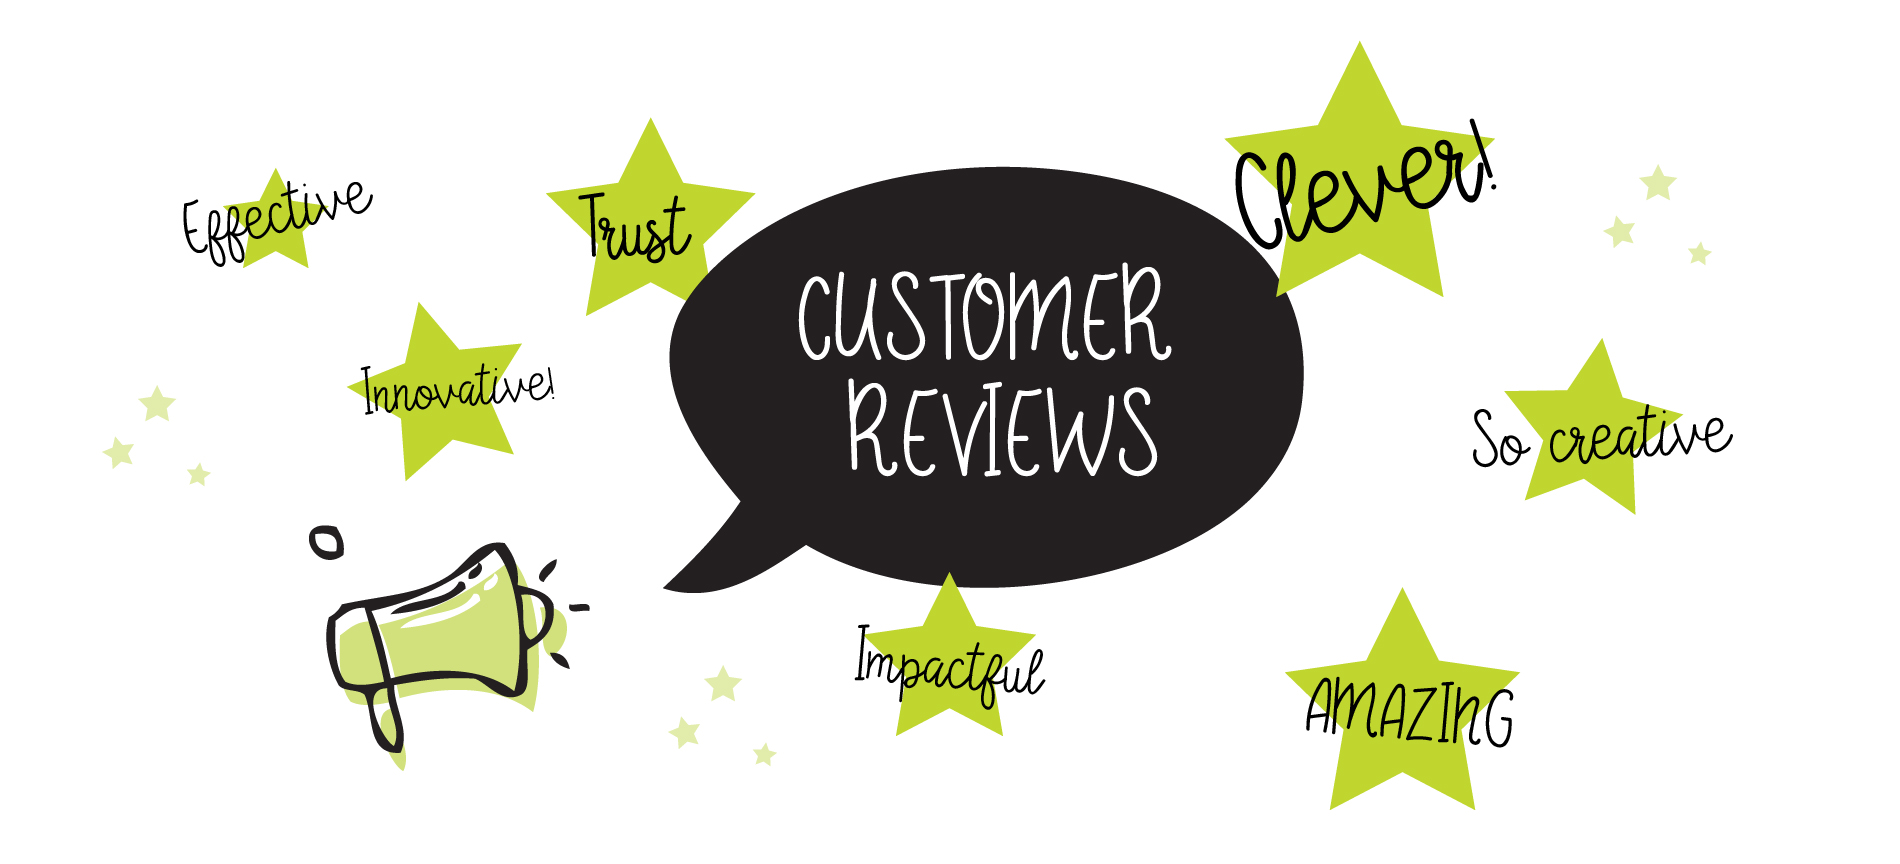 Tips to designing an effective website - Client Reviews